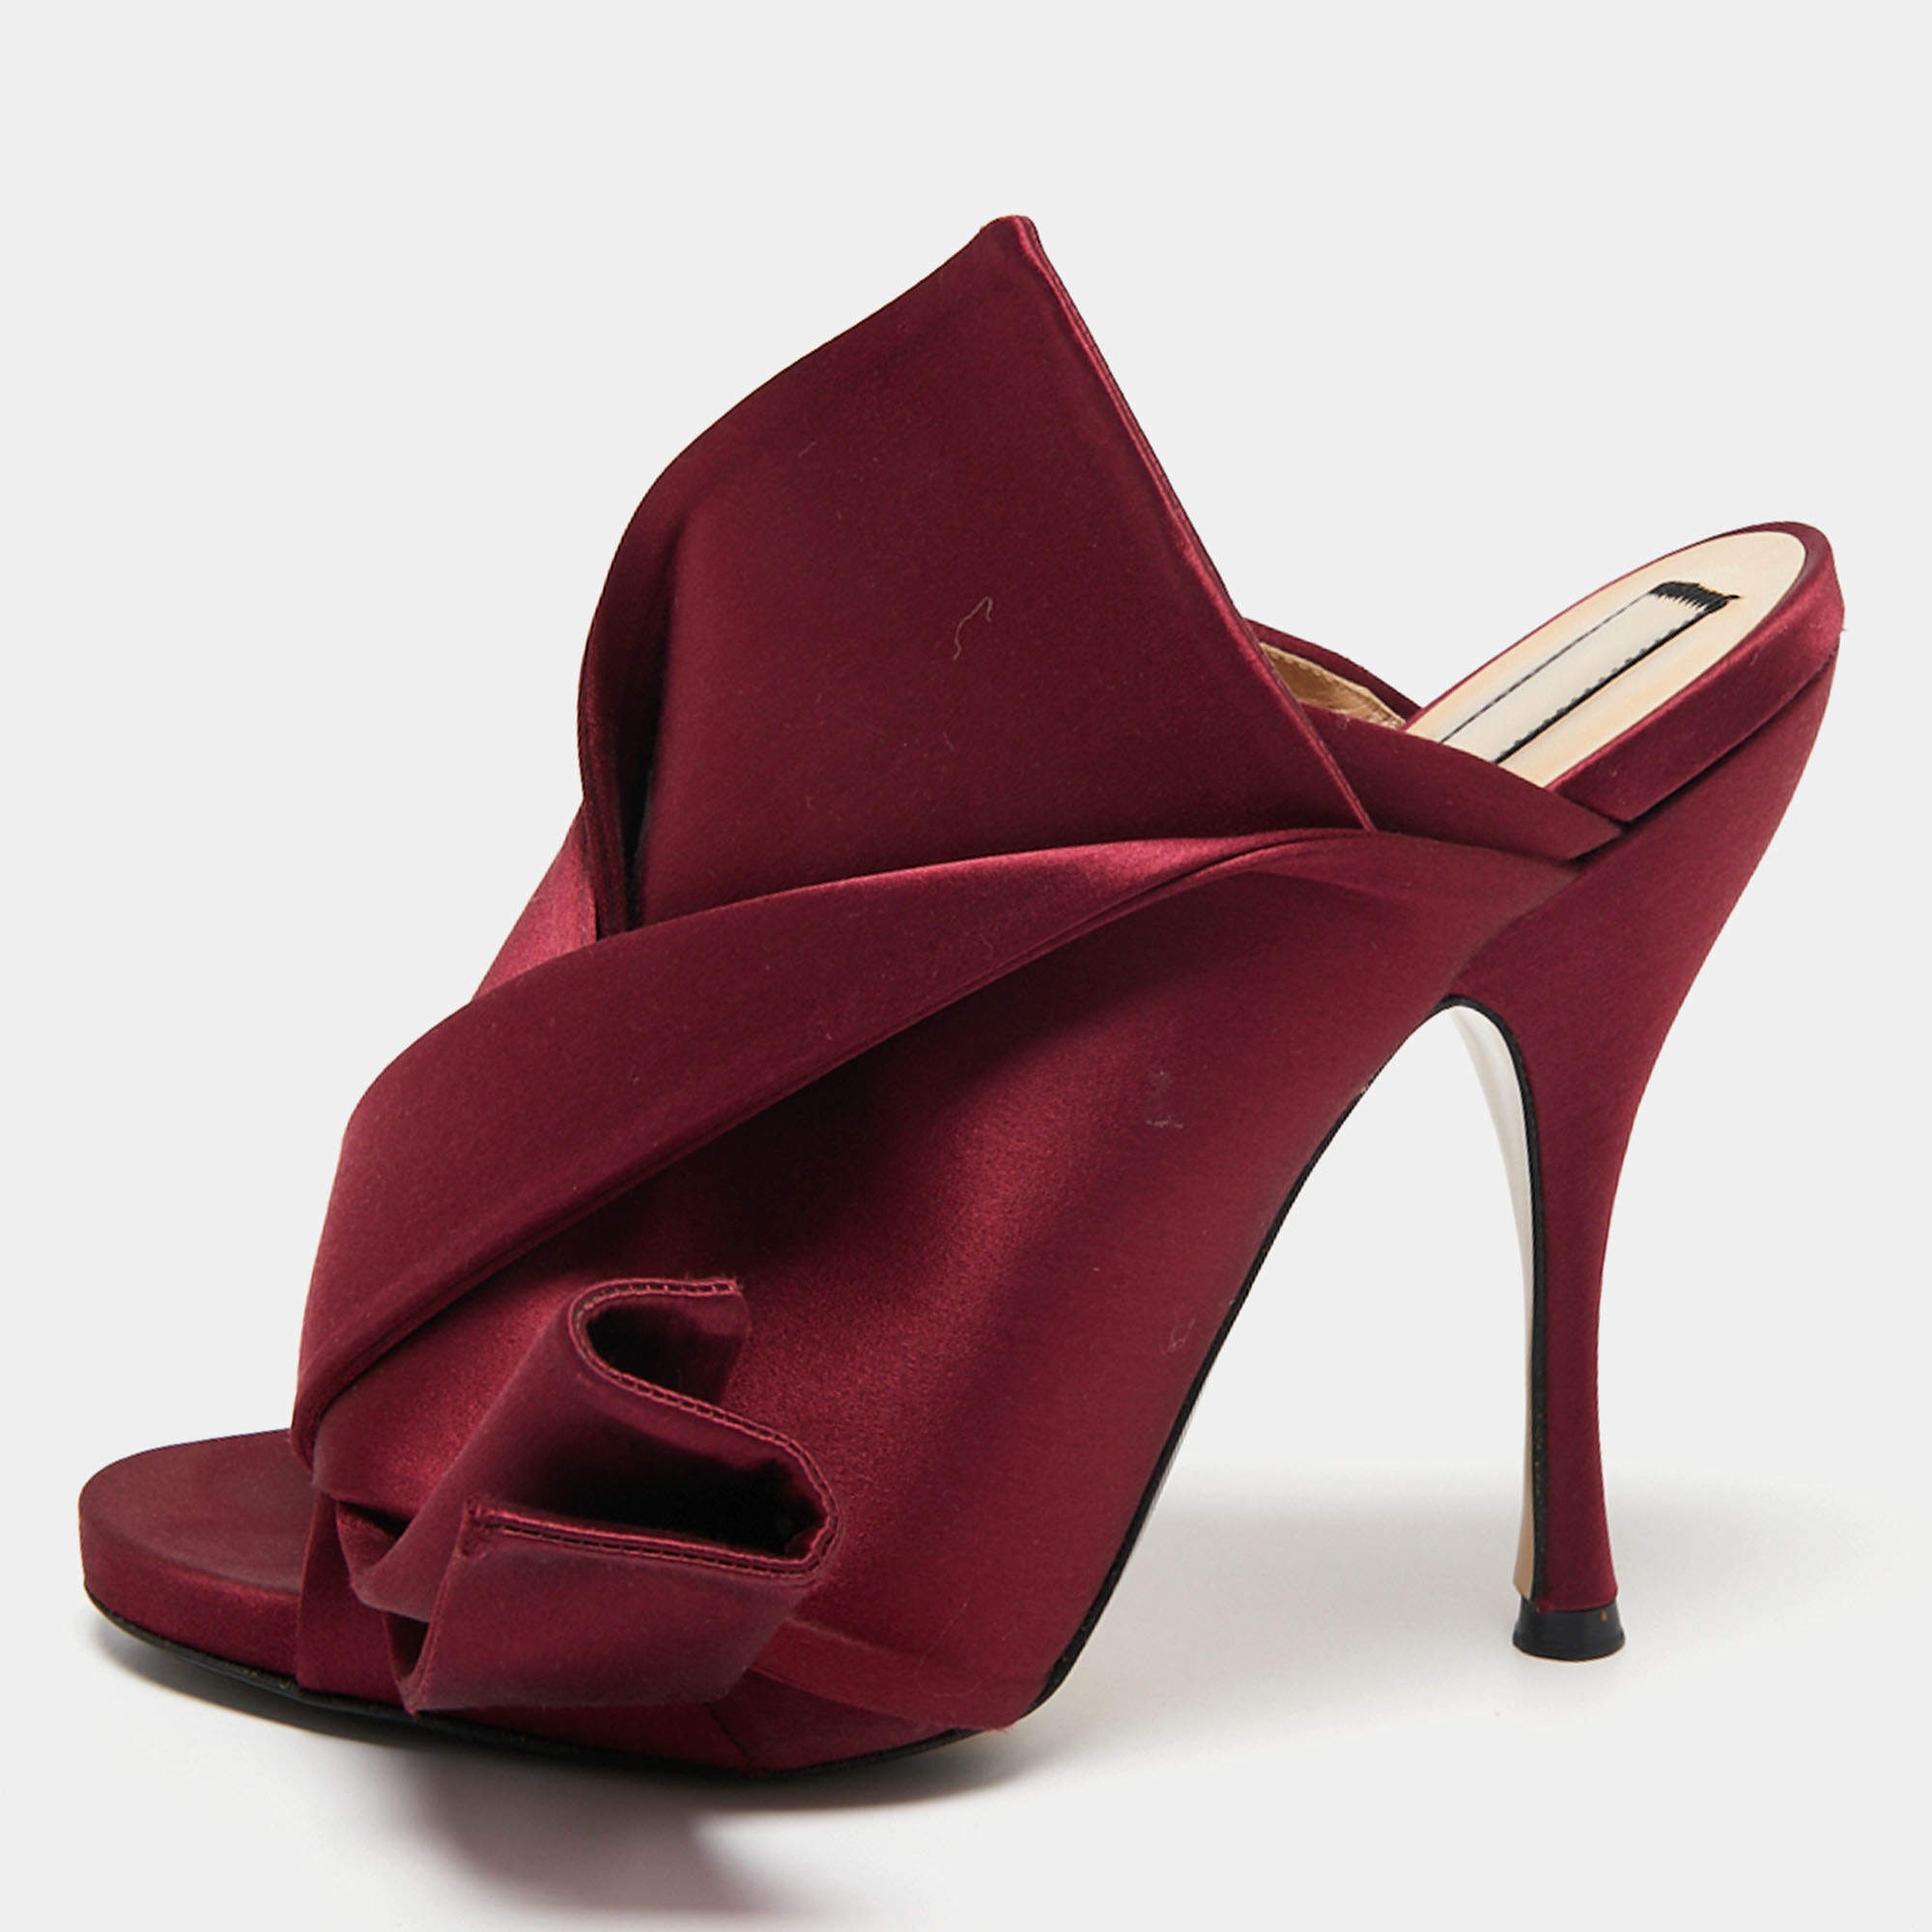 N°21 Burgundy Satin Ronny Pleated Mules Sandals Size 39